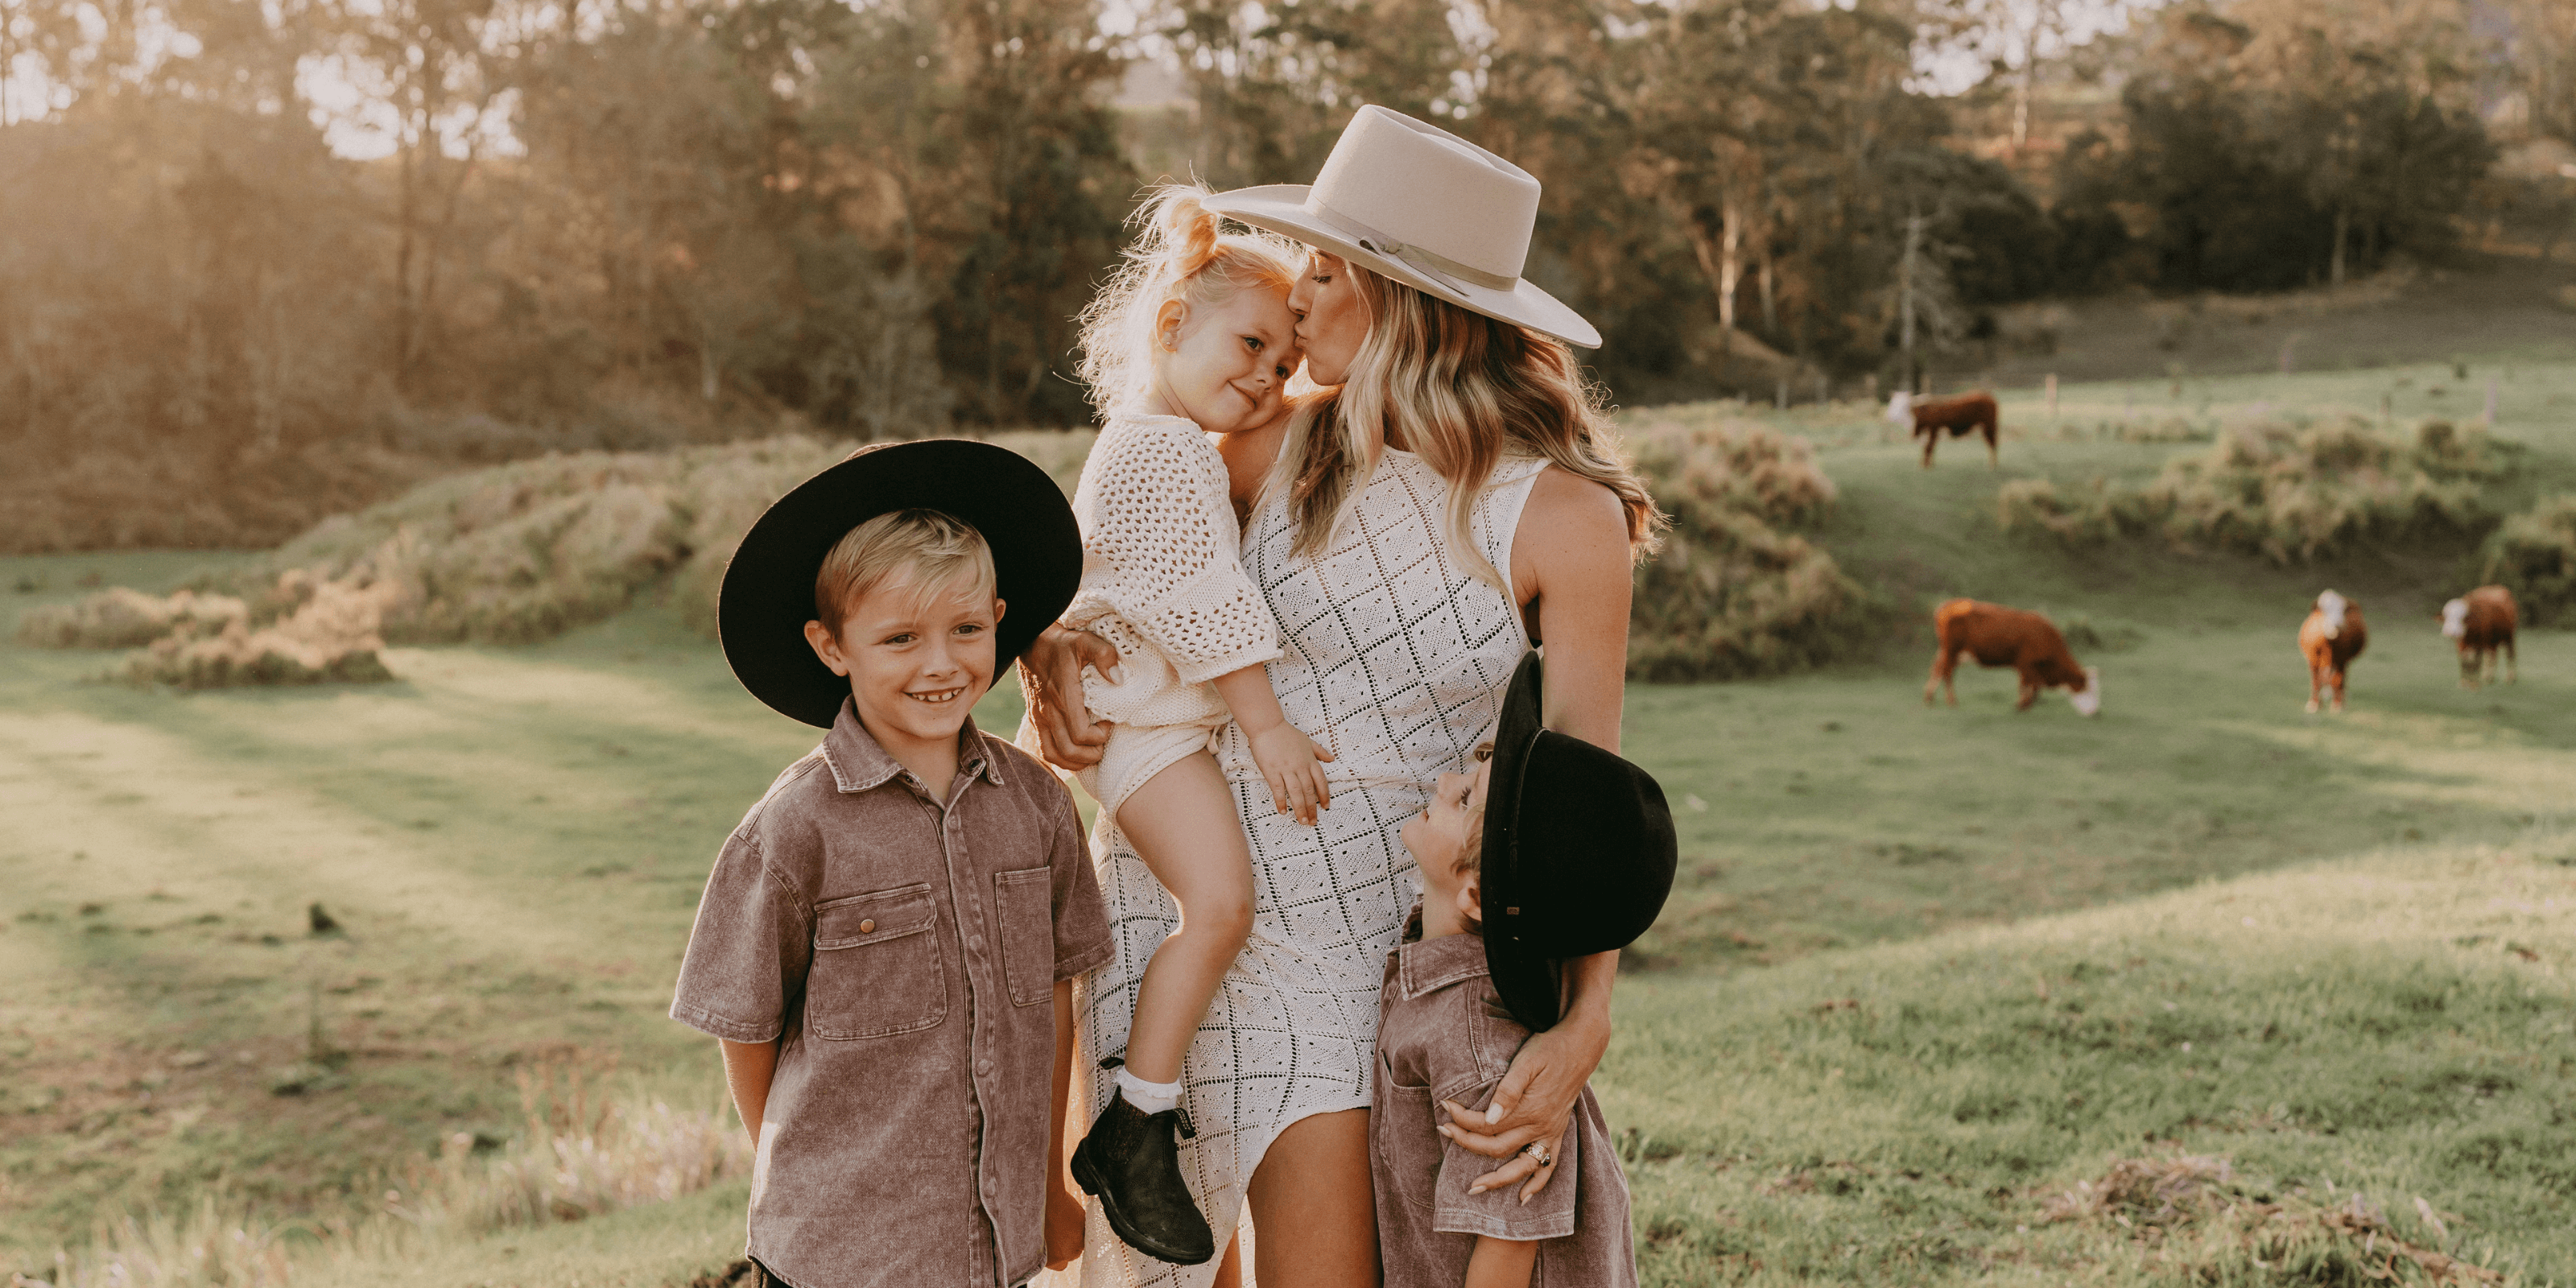 Woman holding a child, with 2 small boys next to her. They are wearing Akubra hats. Celebrate Mother's Day with Akubra.